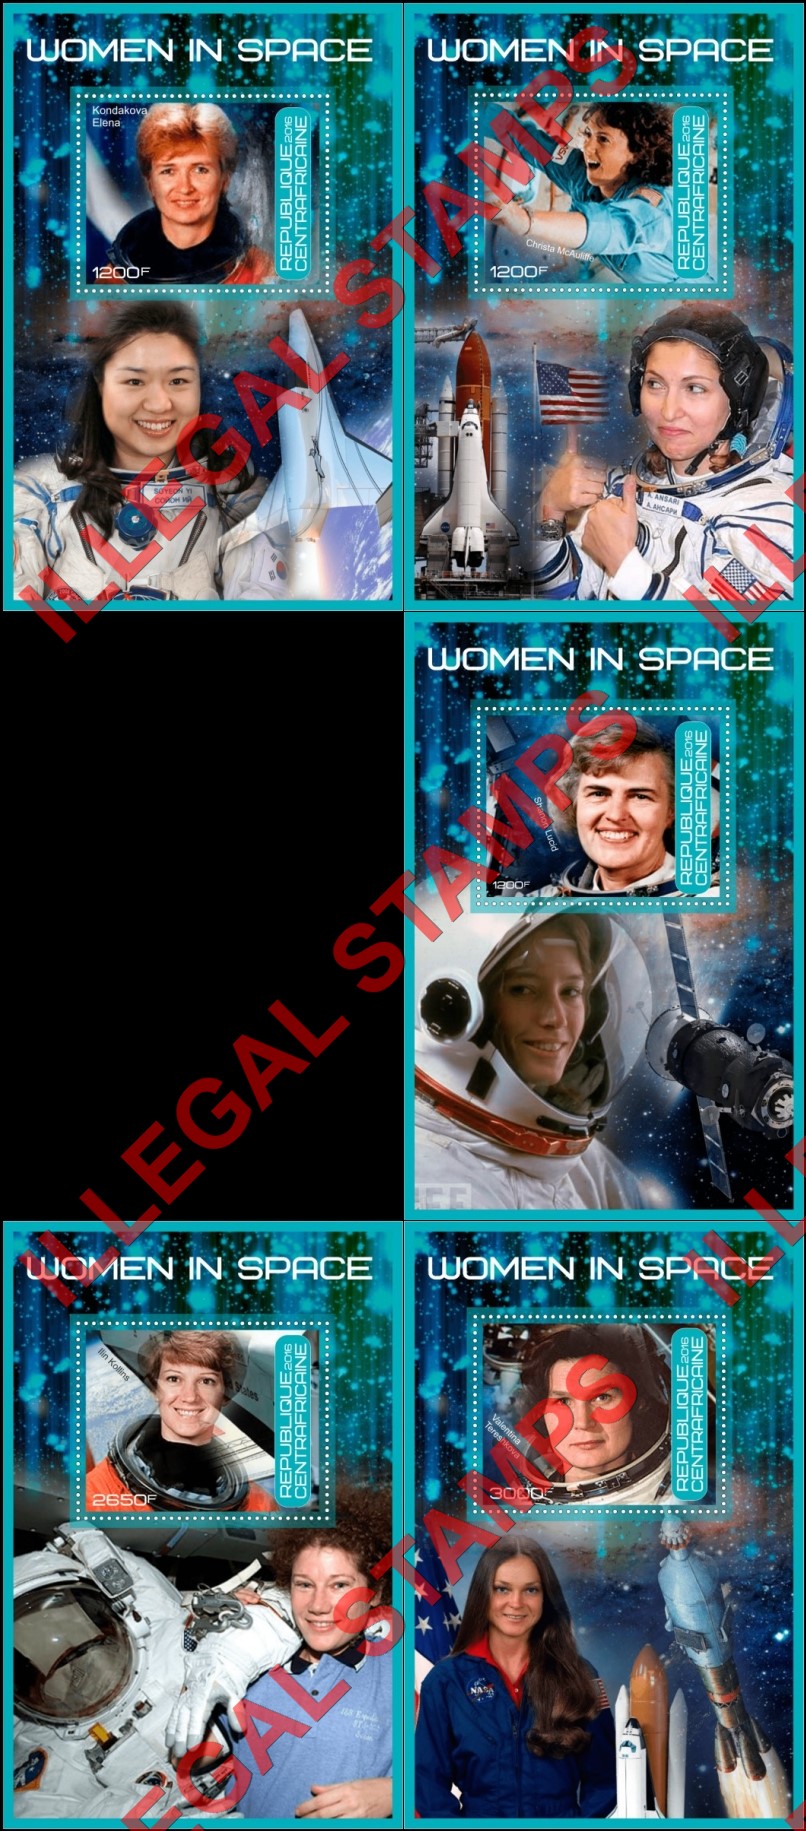 Central African Republic 2016 Space Women in Space Illegal Stamp Souvenir Sheets of 1